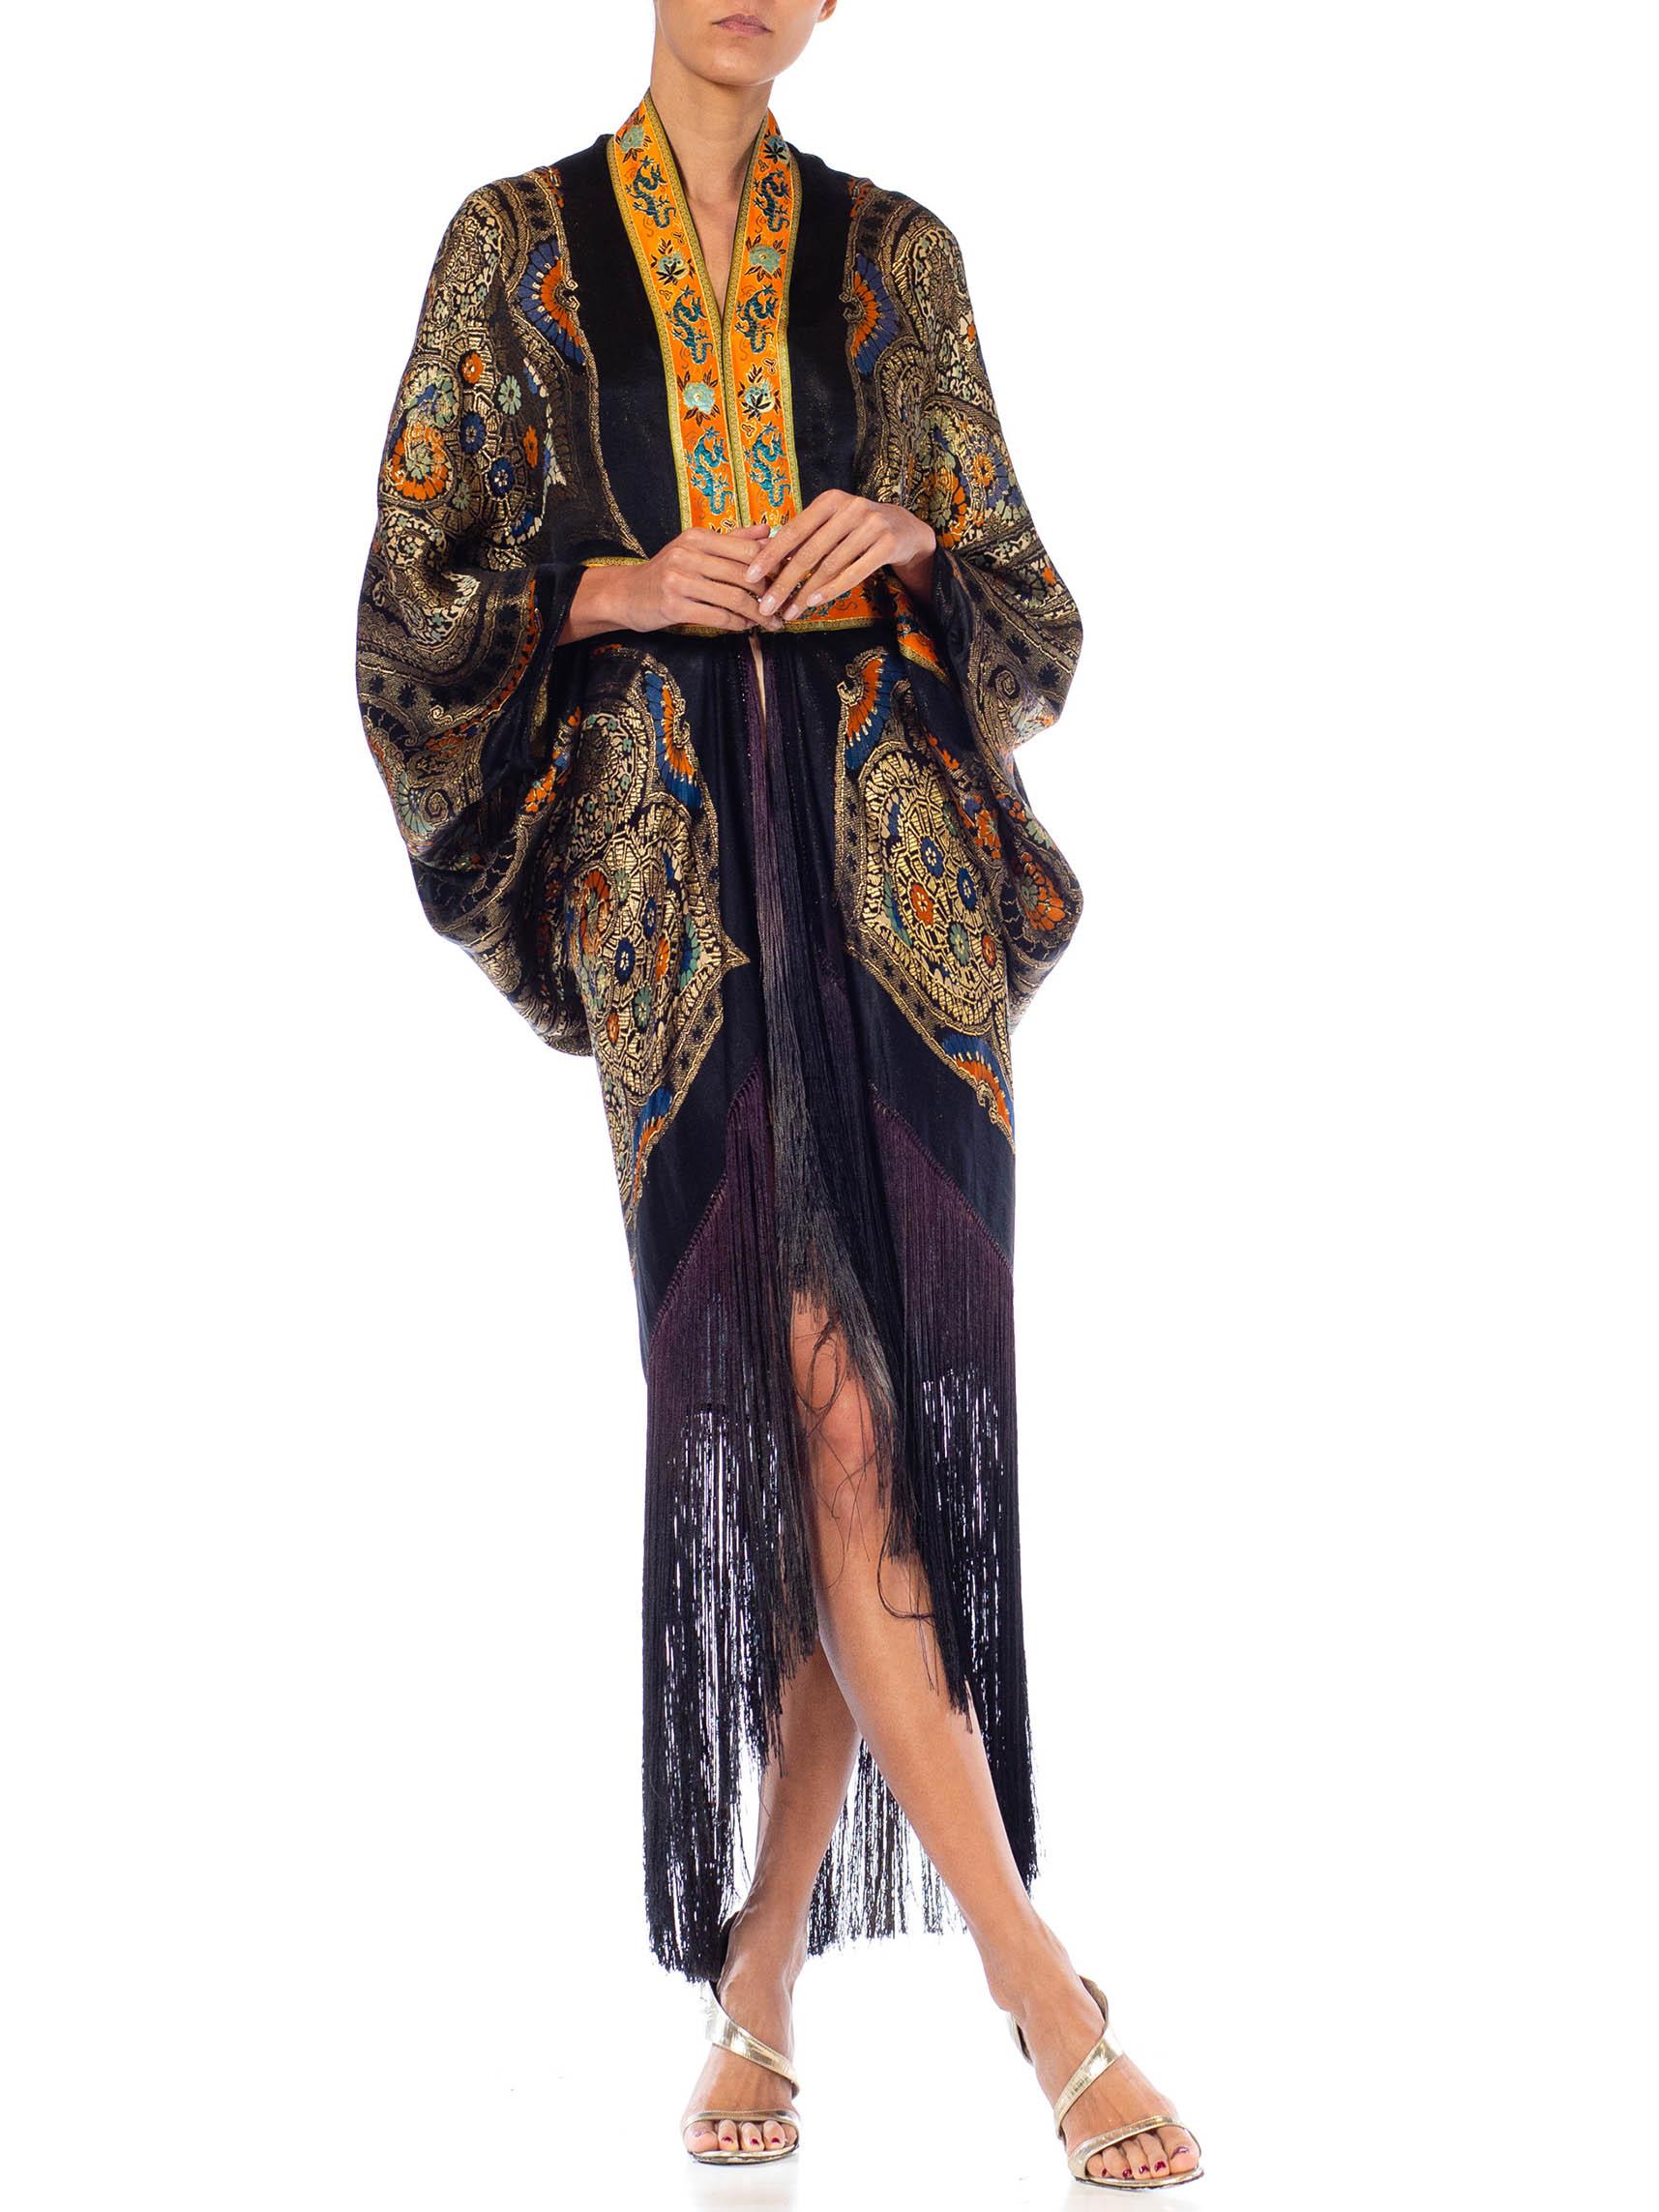 Morphew Collection Black, Orange & Gold Silk Lamé Floral Paisley Cocoon With Fr For Sale 4